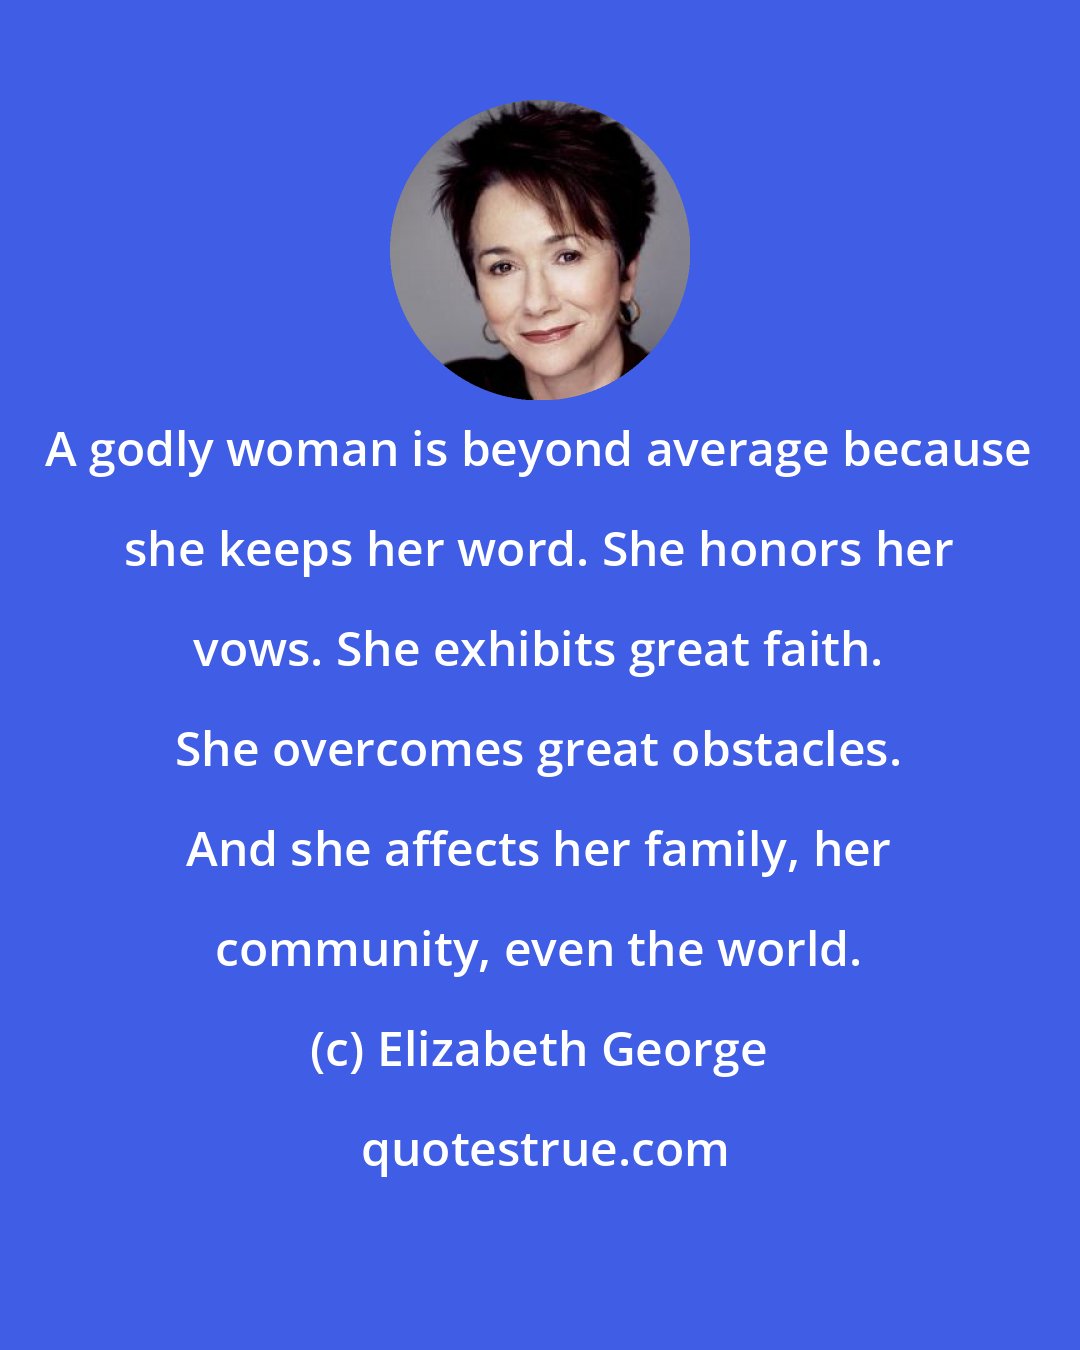 Elizabeth George: A godly woman is beyond average because she keeps her word. She honors her vows. She exhibits great faith. She overcomes great obstacles. And she affects her family, her community, even the world.